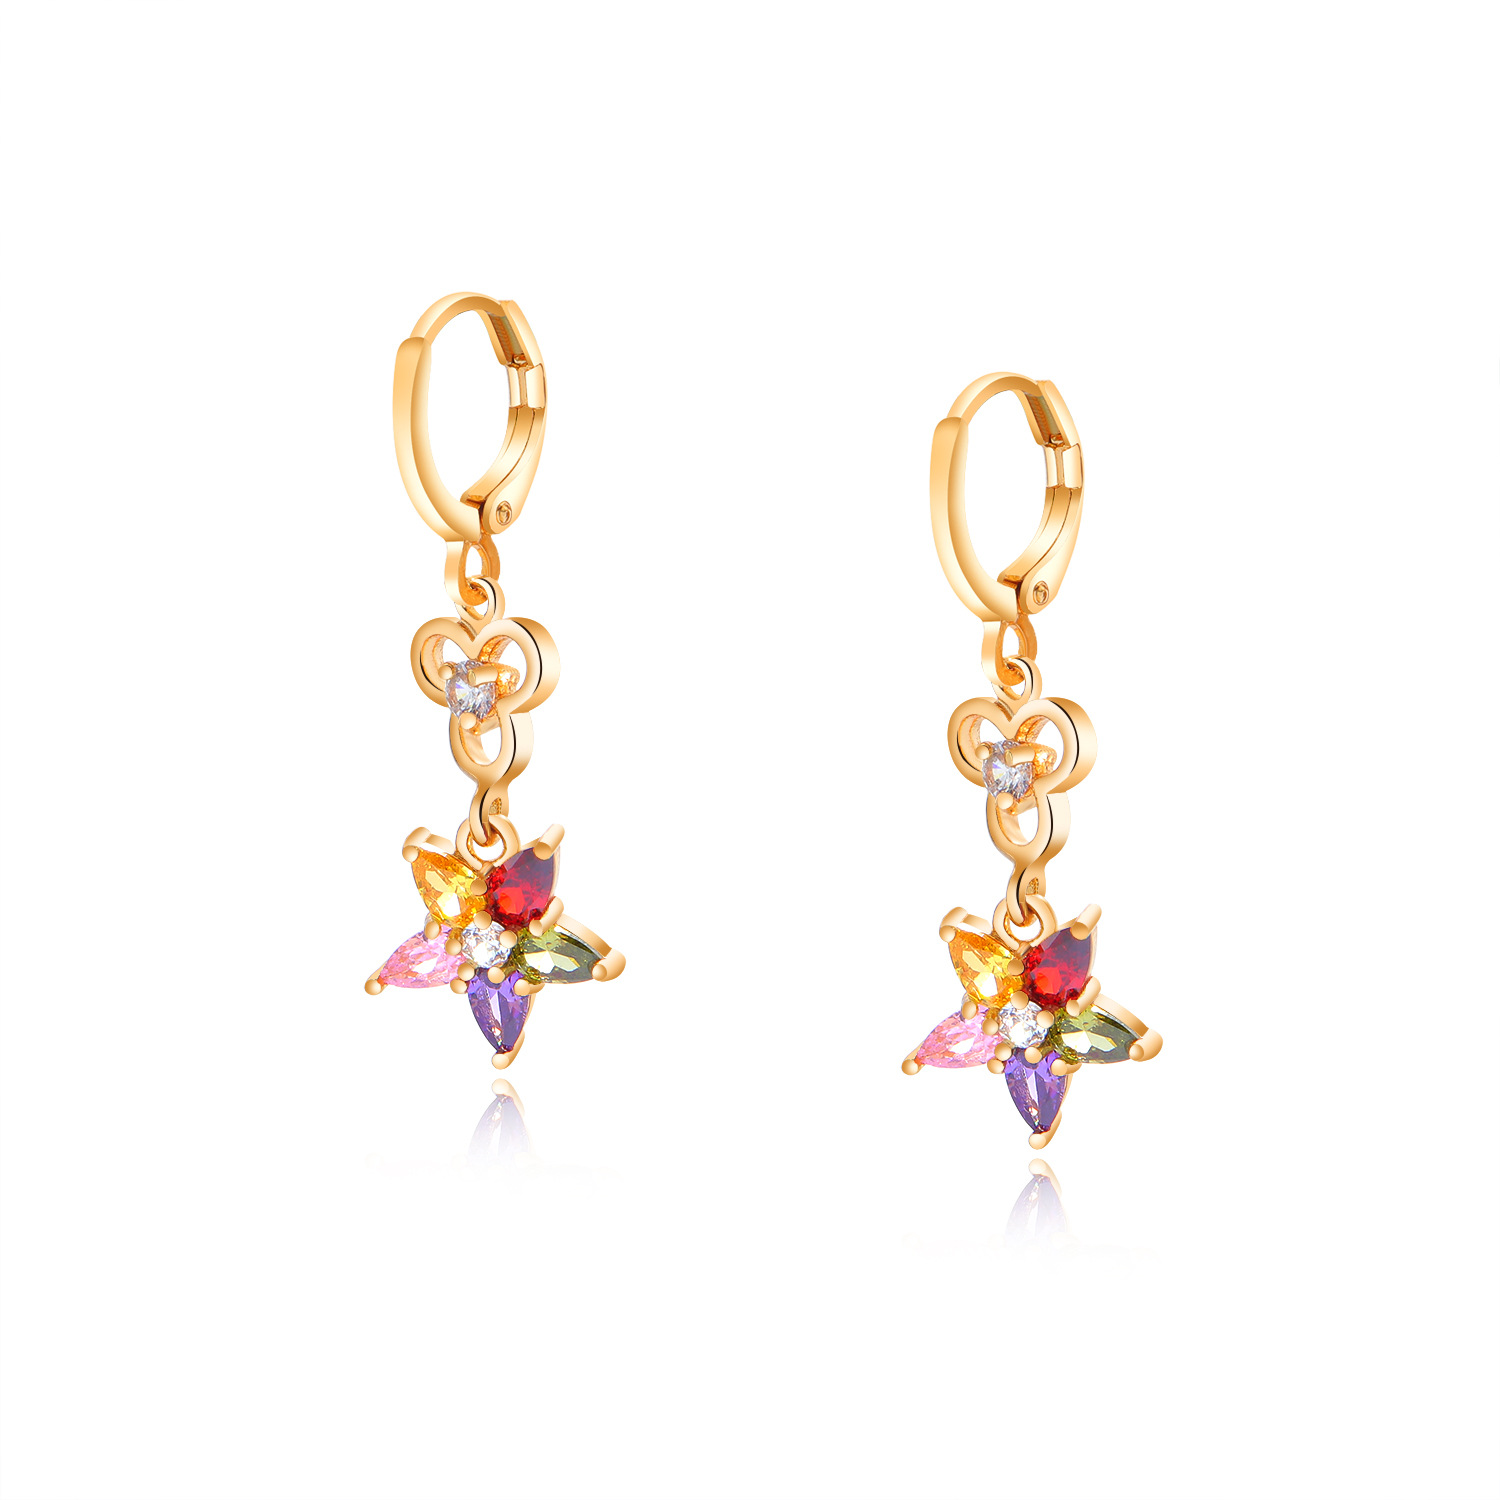 2 real gold plated with colorful rhinestone